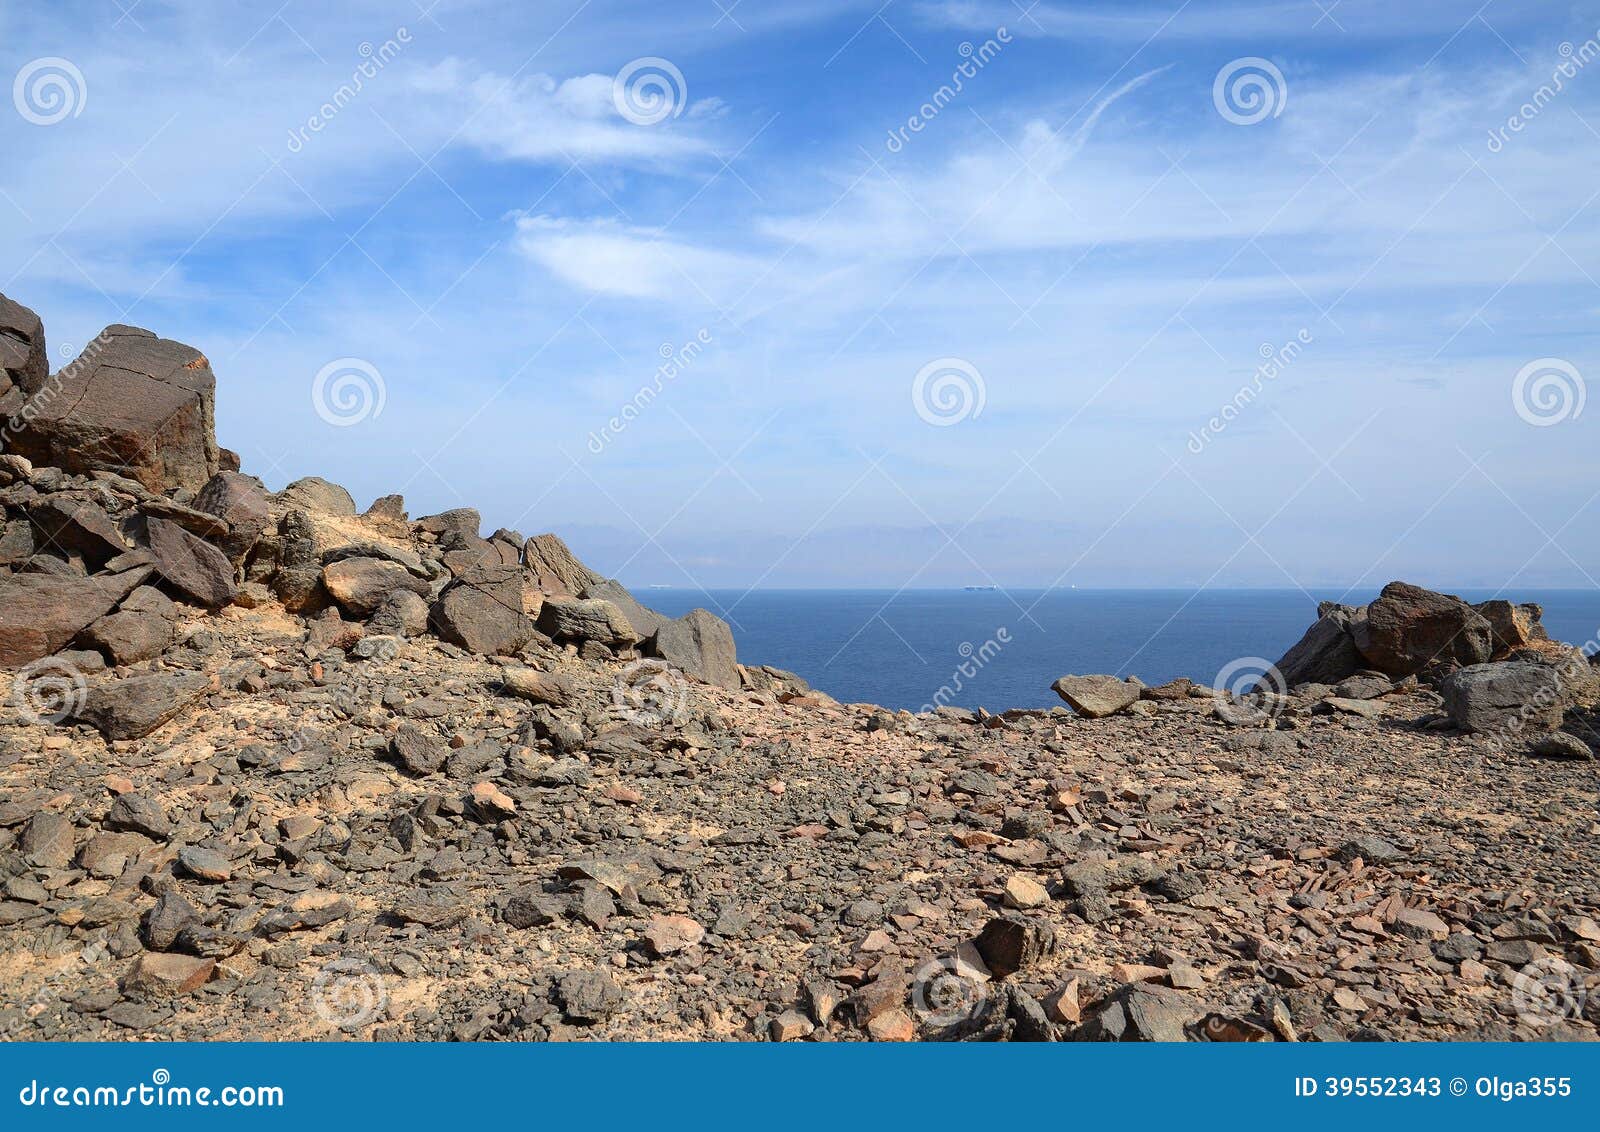 rocky terrain on a background of sea and sky